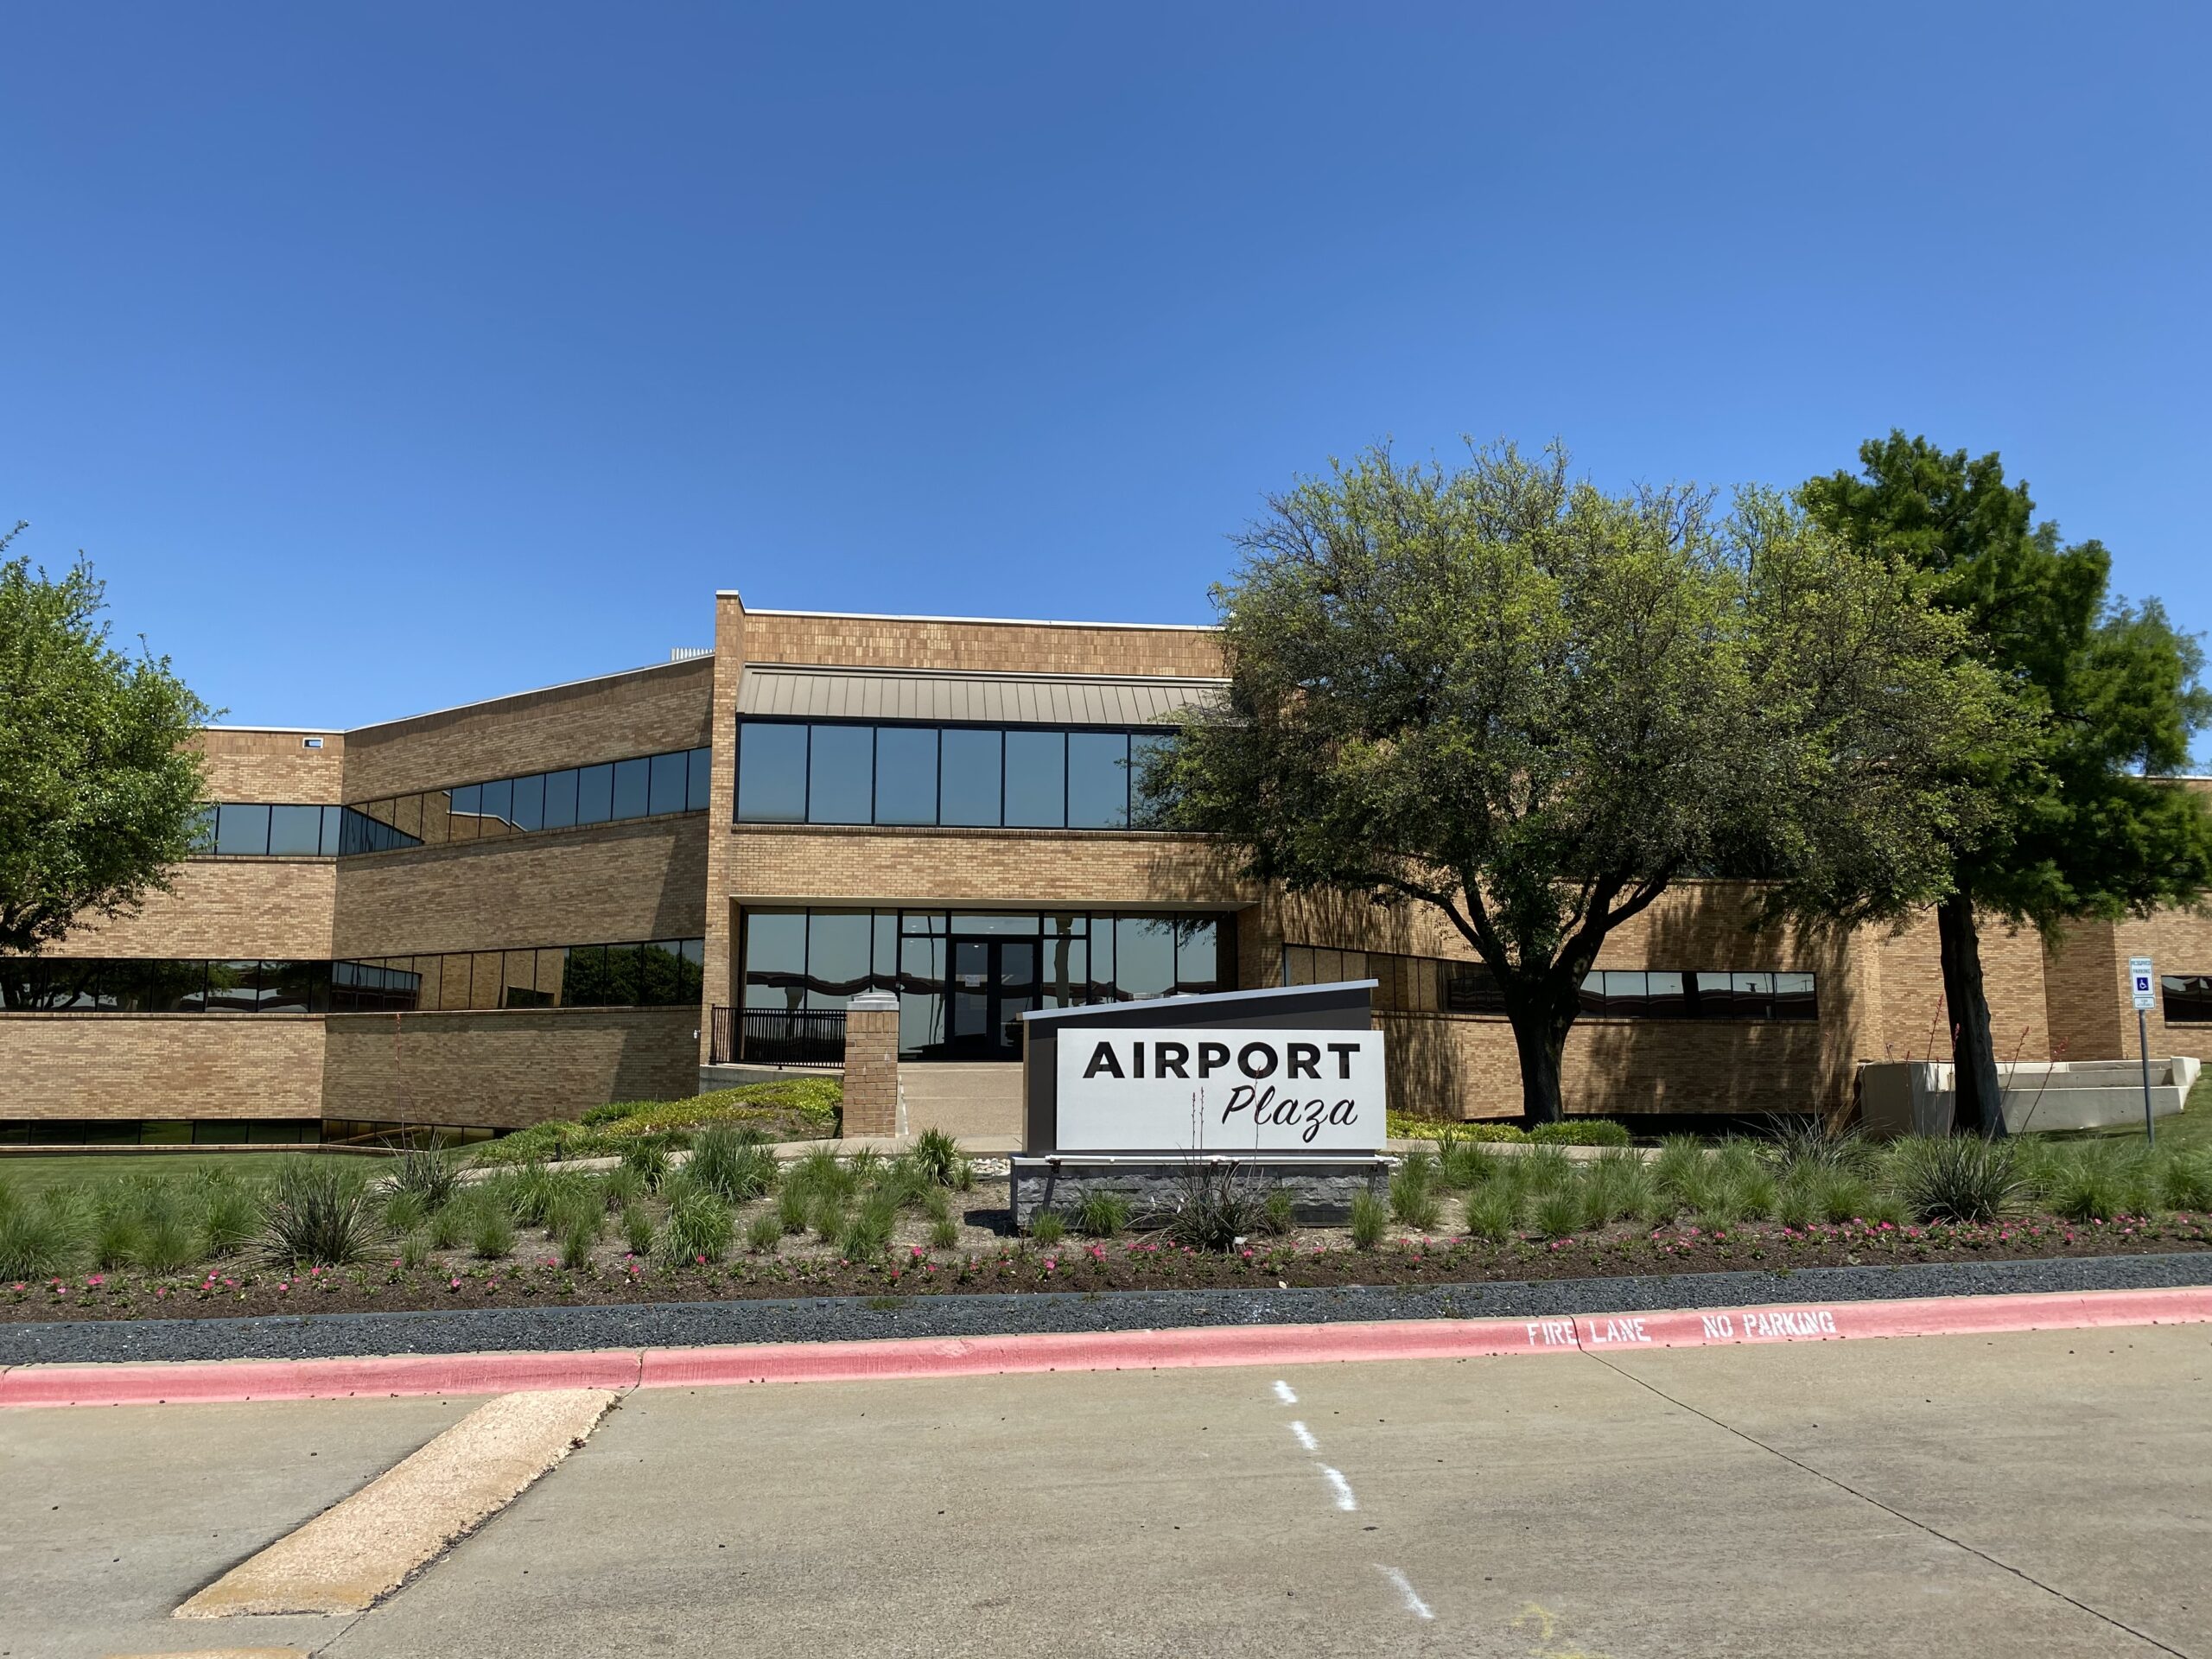 Airport Plaza is located at the intersection of Highway 161 and Highway 183.